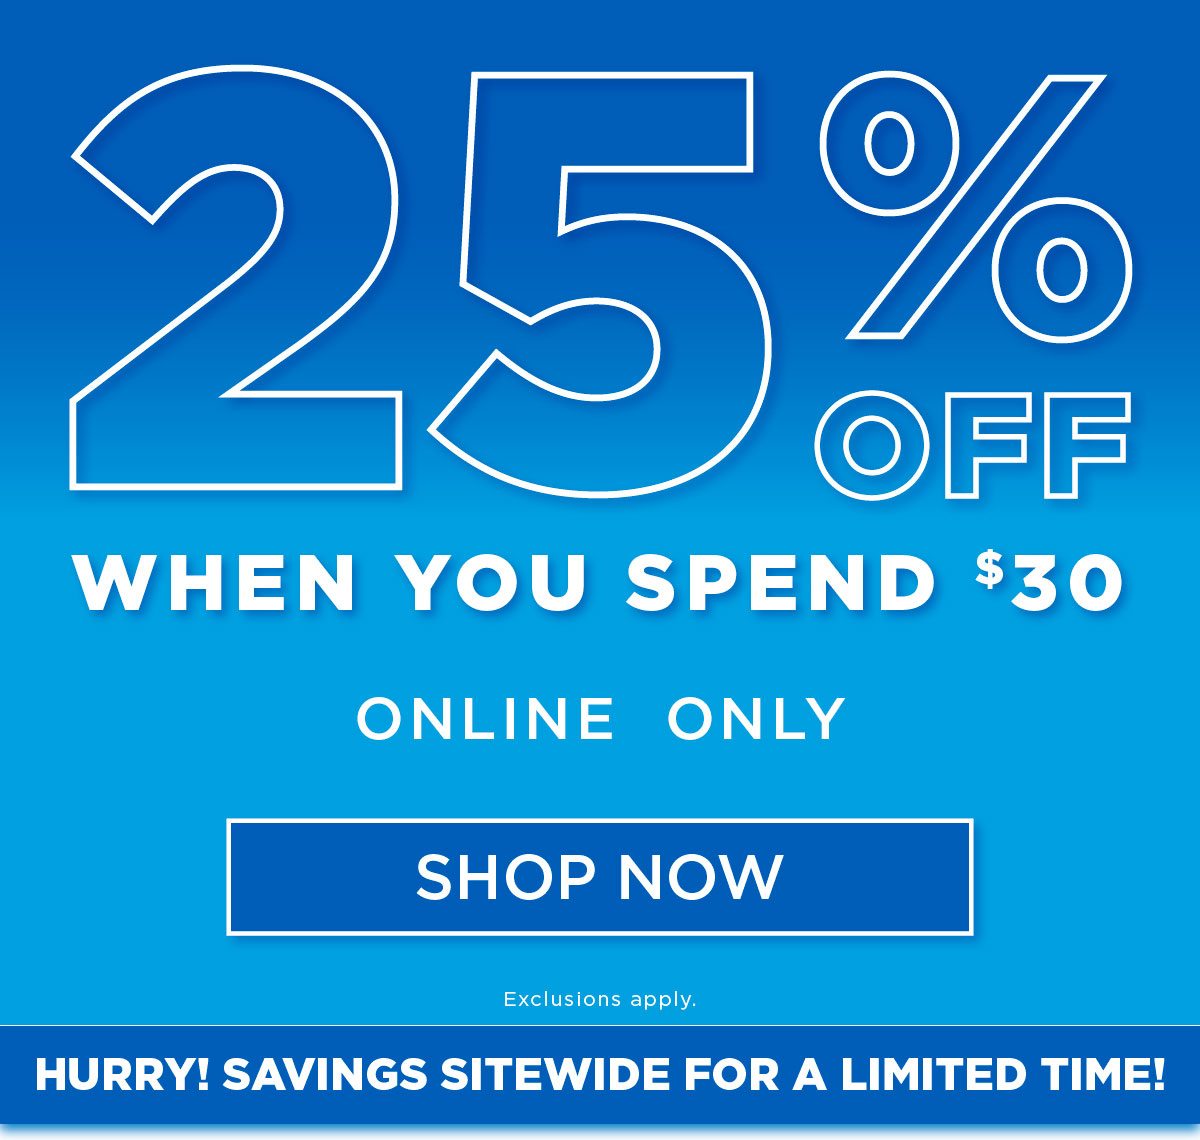 25% off when you spend $30 online only